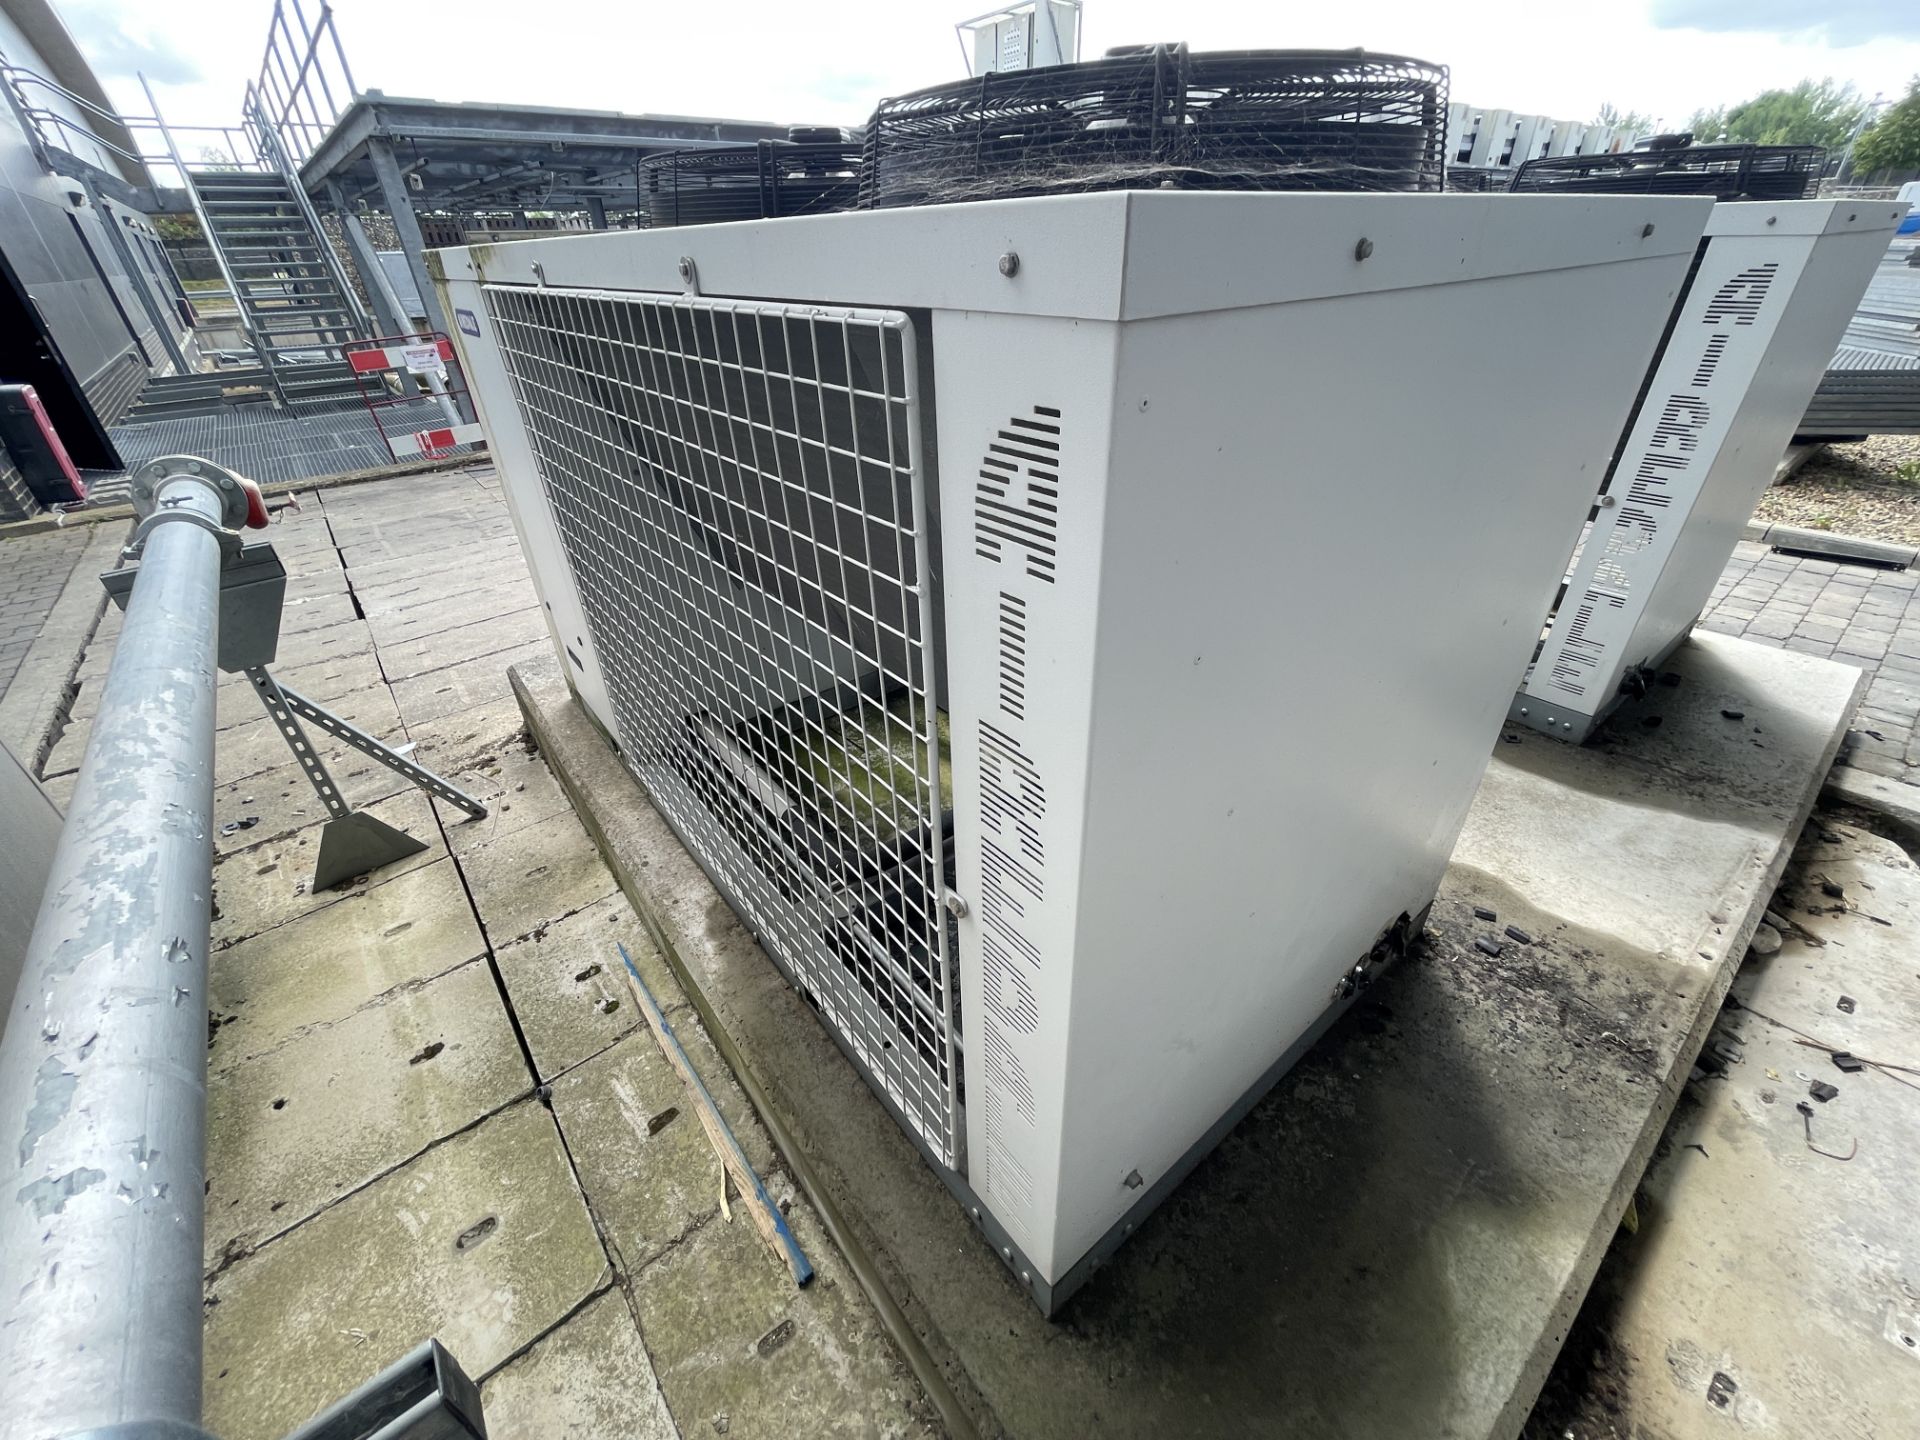 Airedale TWIN FAN CHILLER UNIT, overall size 2.3m x 1.1m x 1.3m high UNDERSTOOD TO BE MODEL - Image 2 of 6